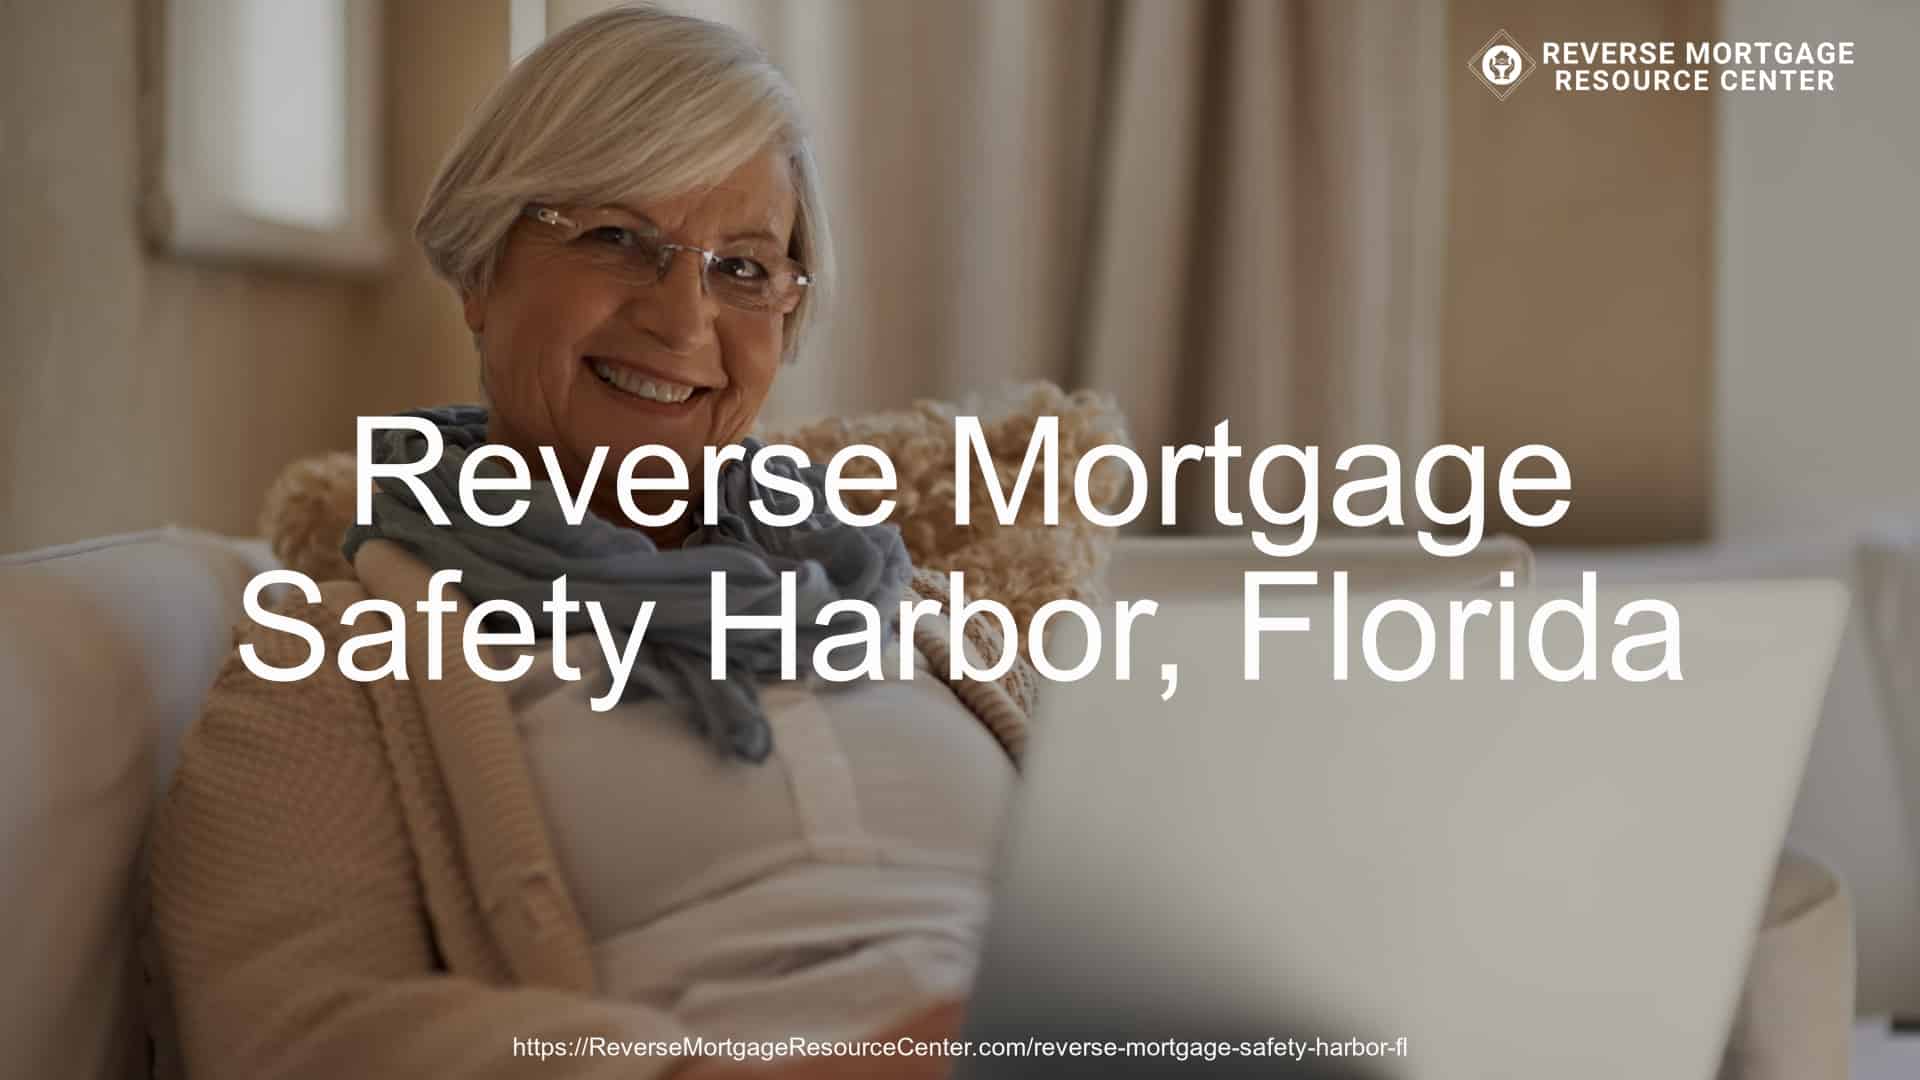 Reverse Mortgage in Safety Harbor, FL